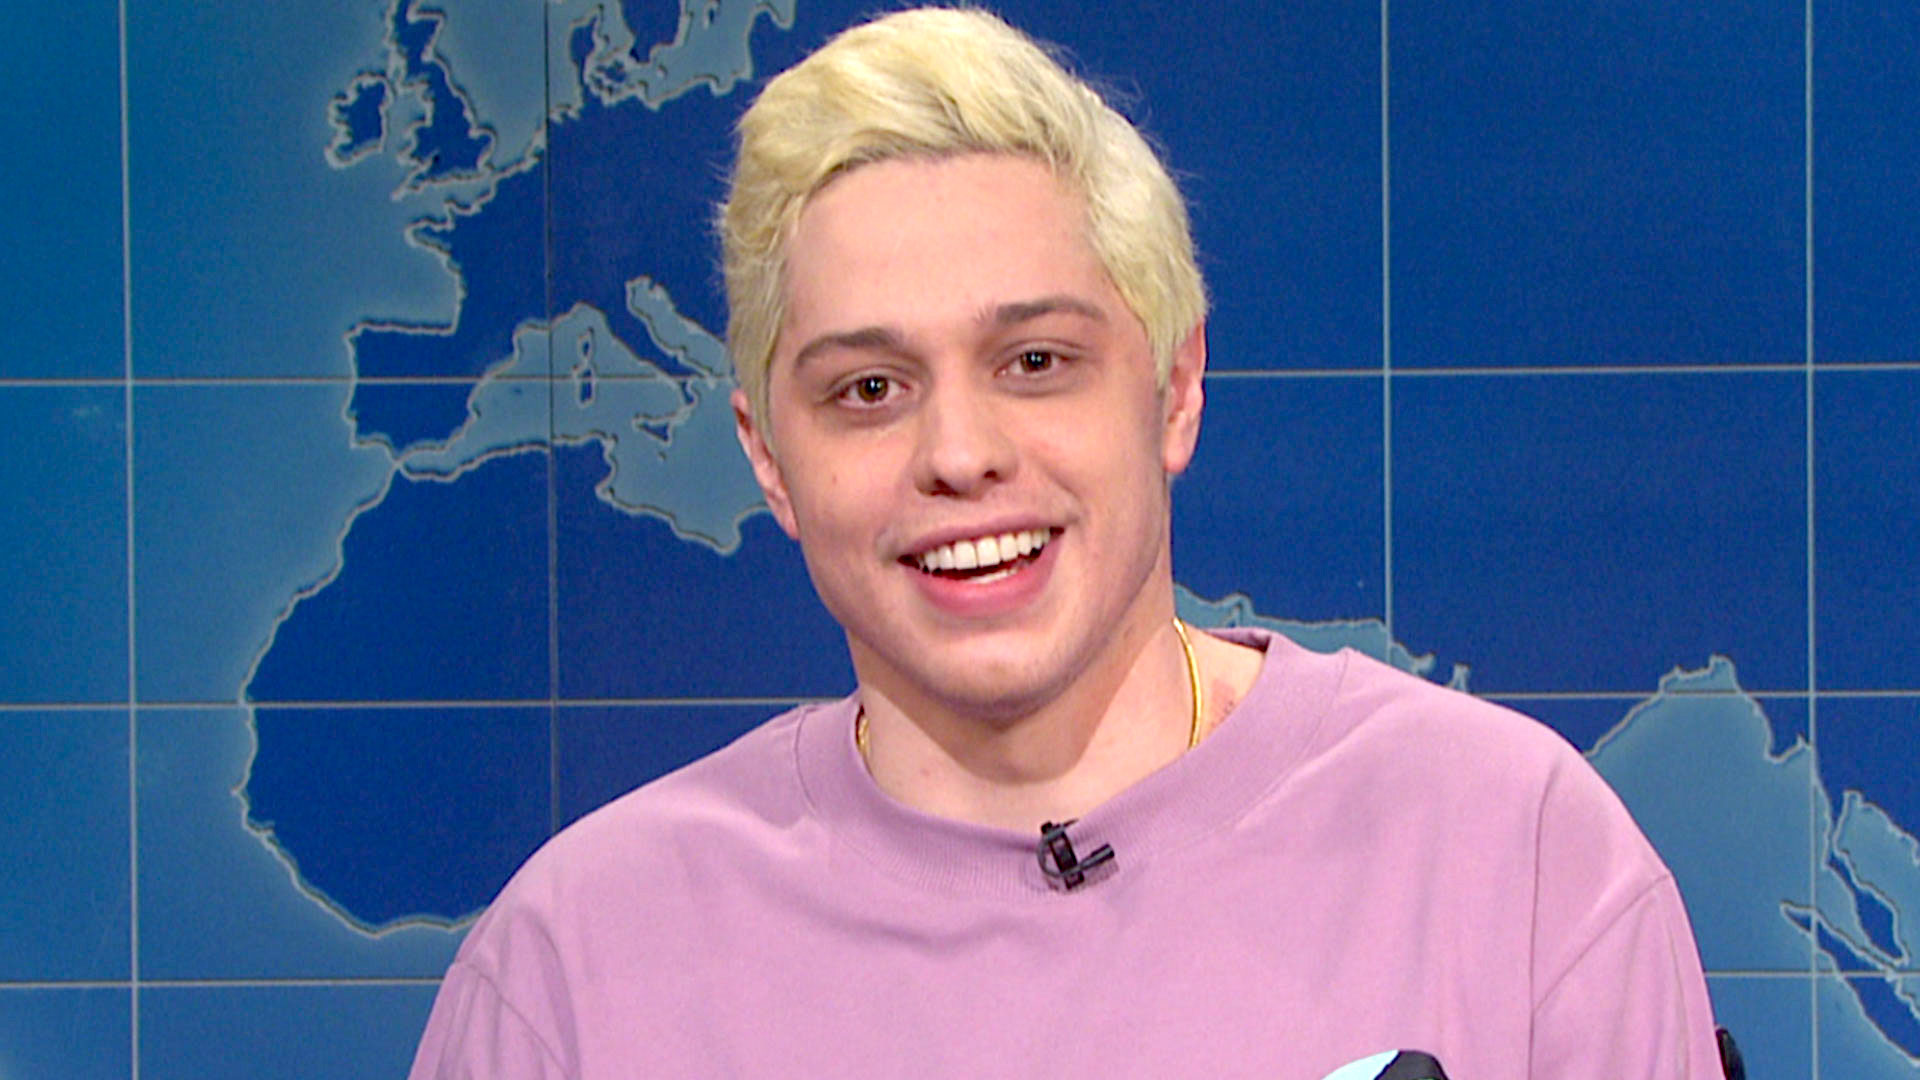 What Episode Of Snl Is Pete Davidson On Watch Saturday Night Live Highlight: Weekend Update: Pete Davidson on